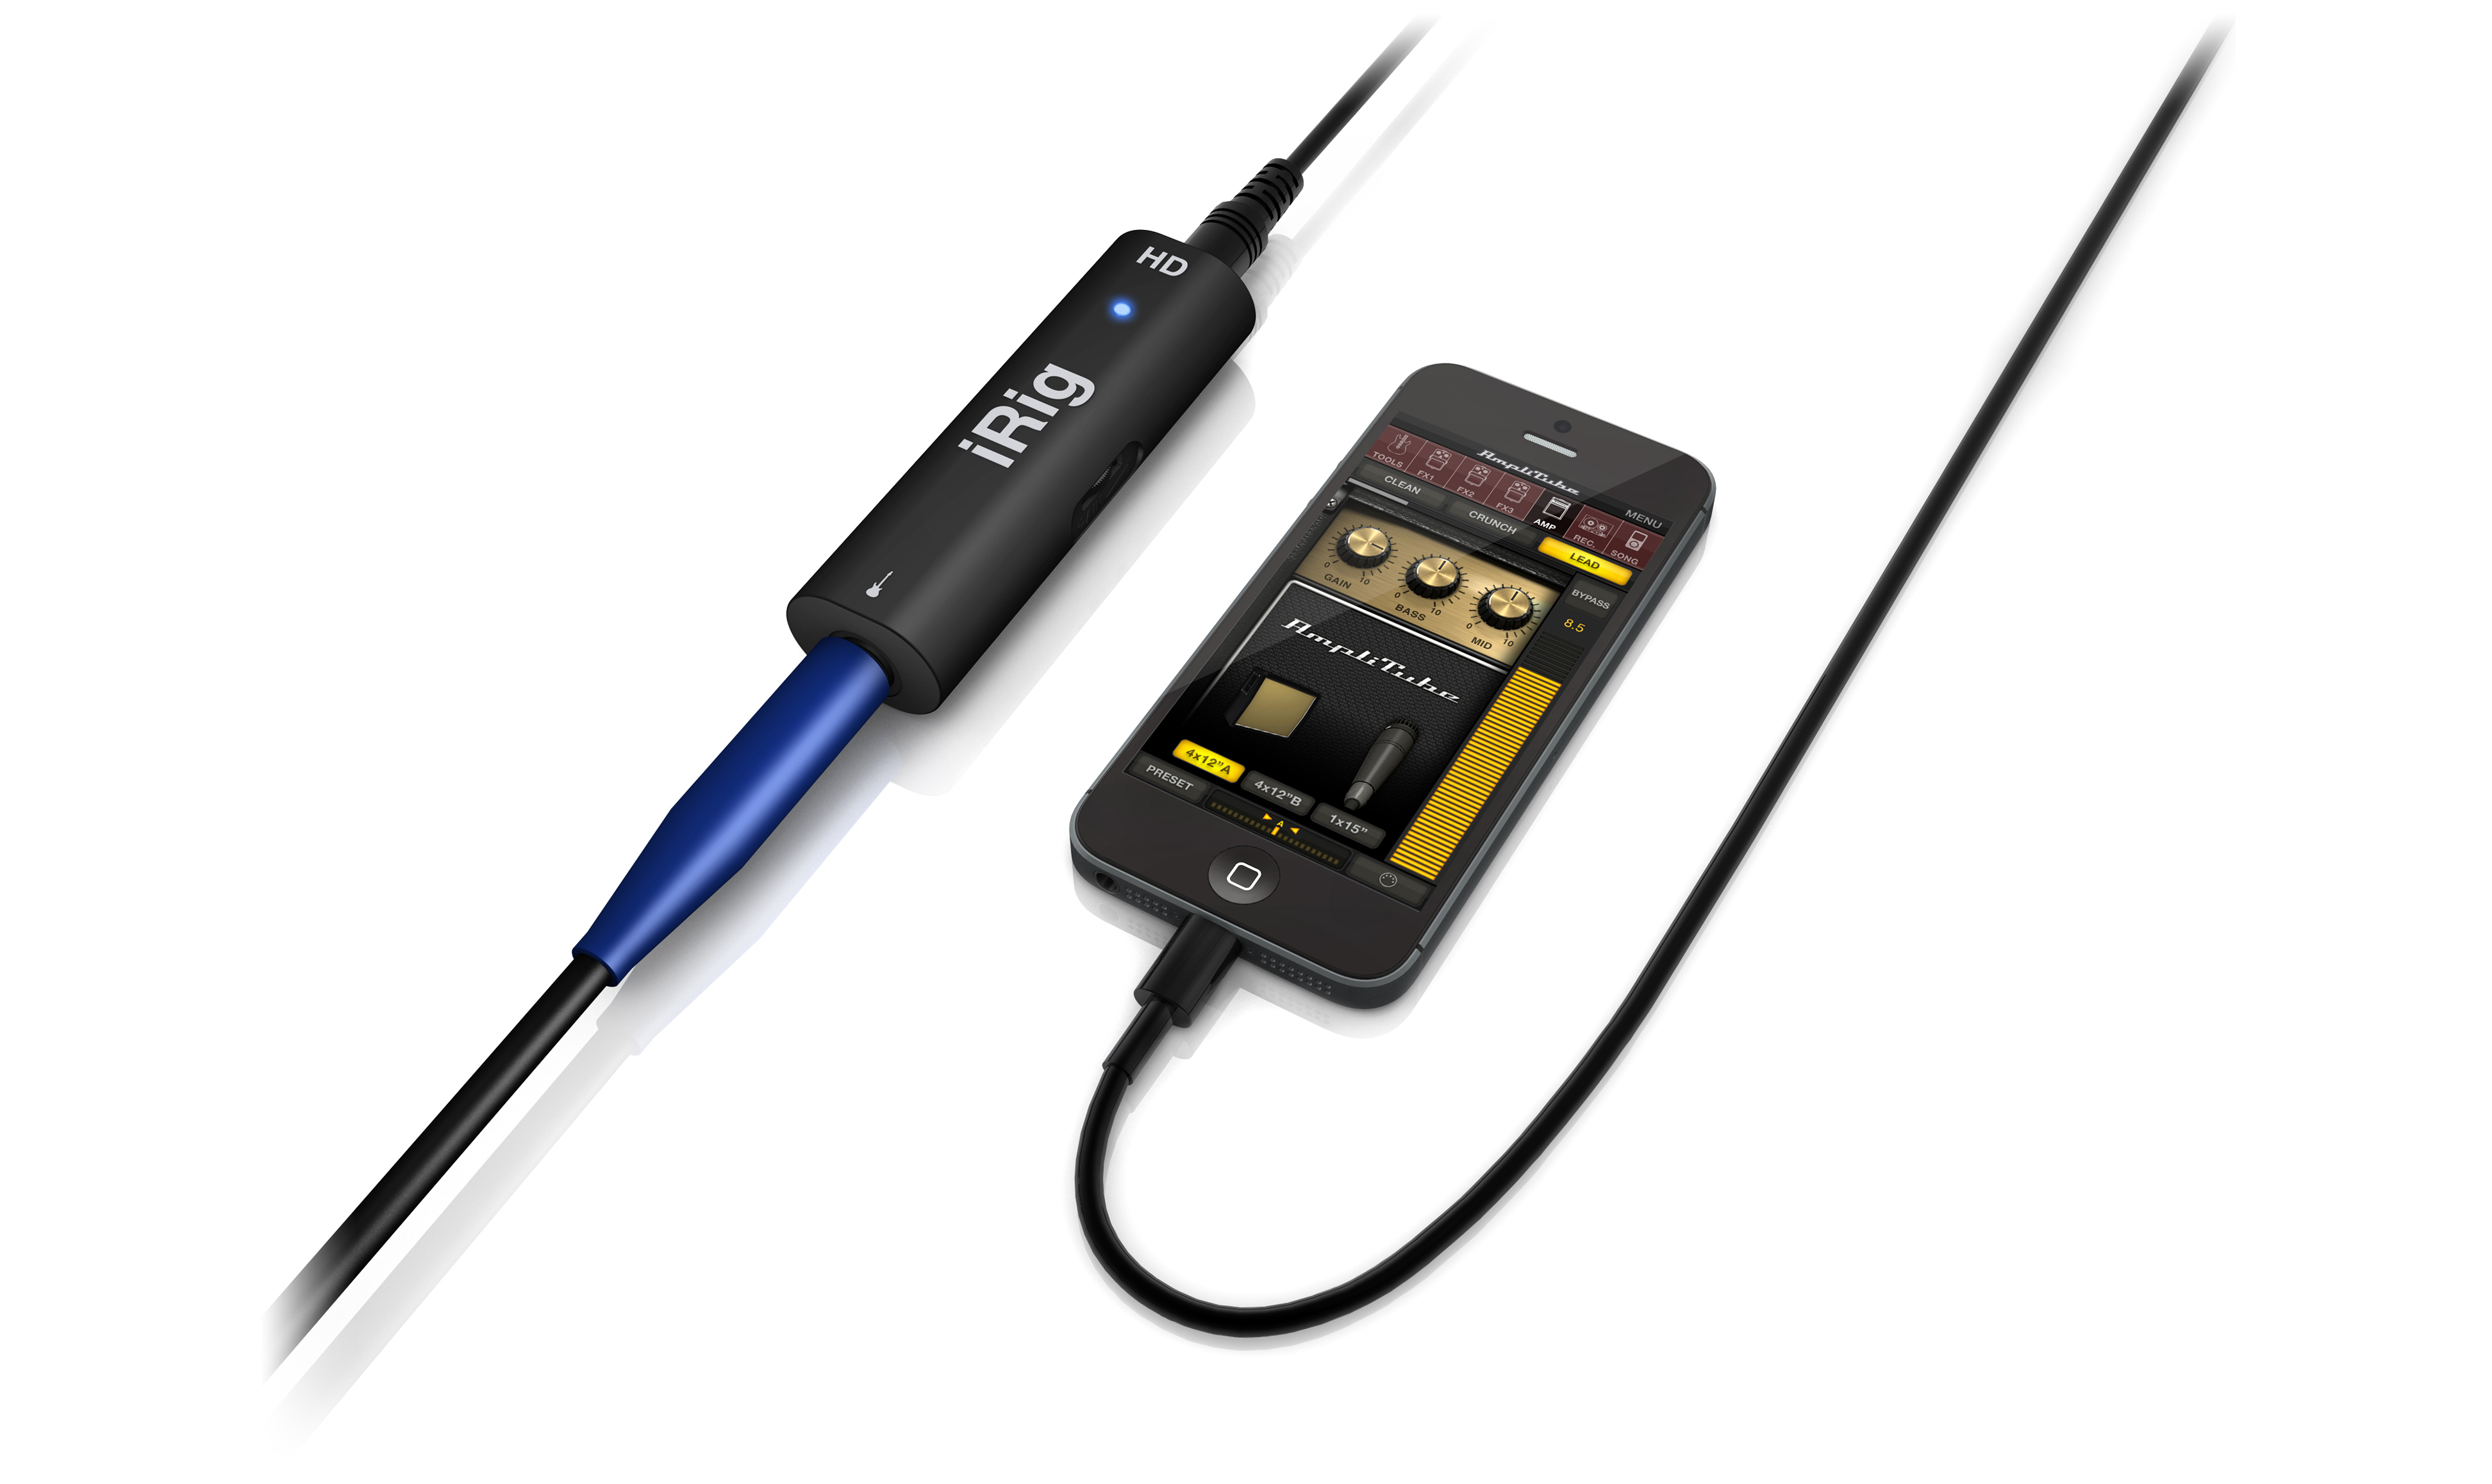 iRig HD and iPhone 5